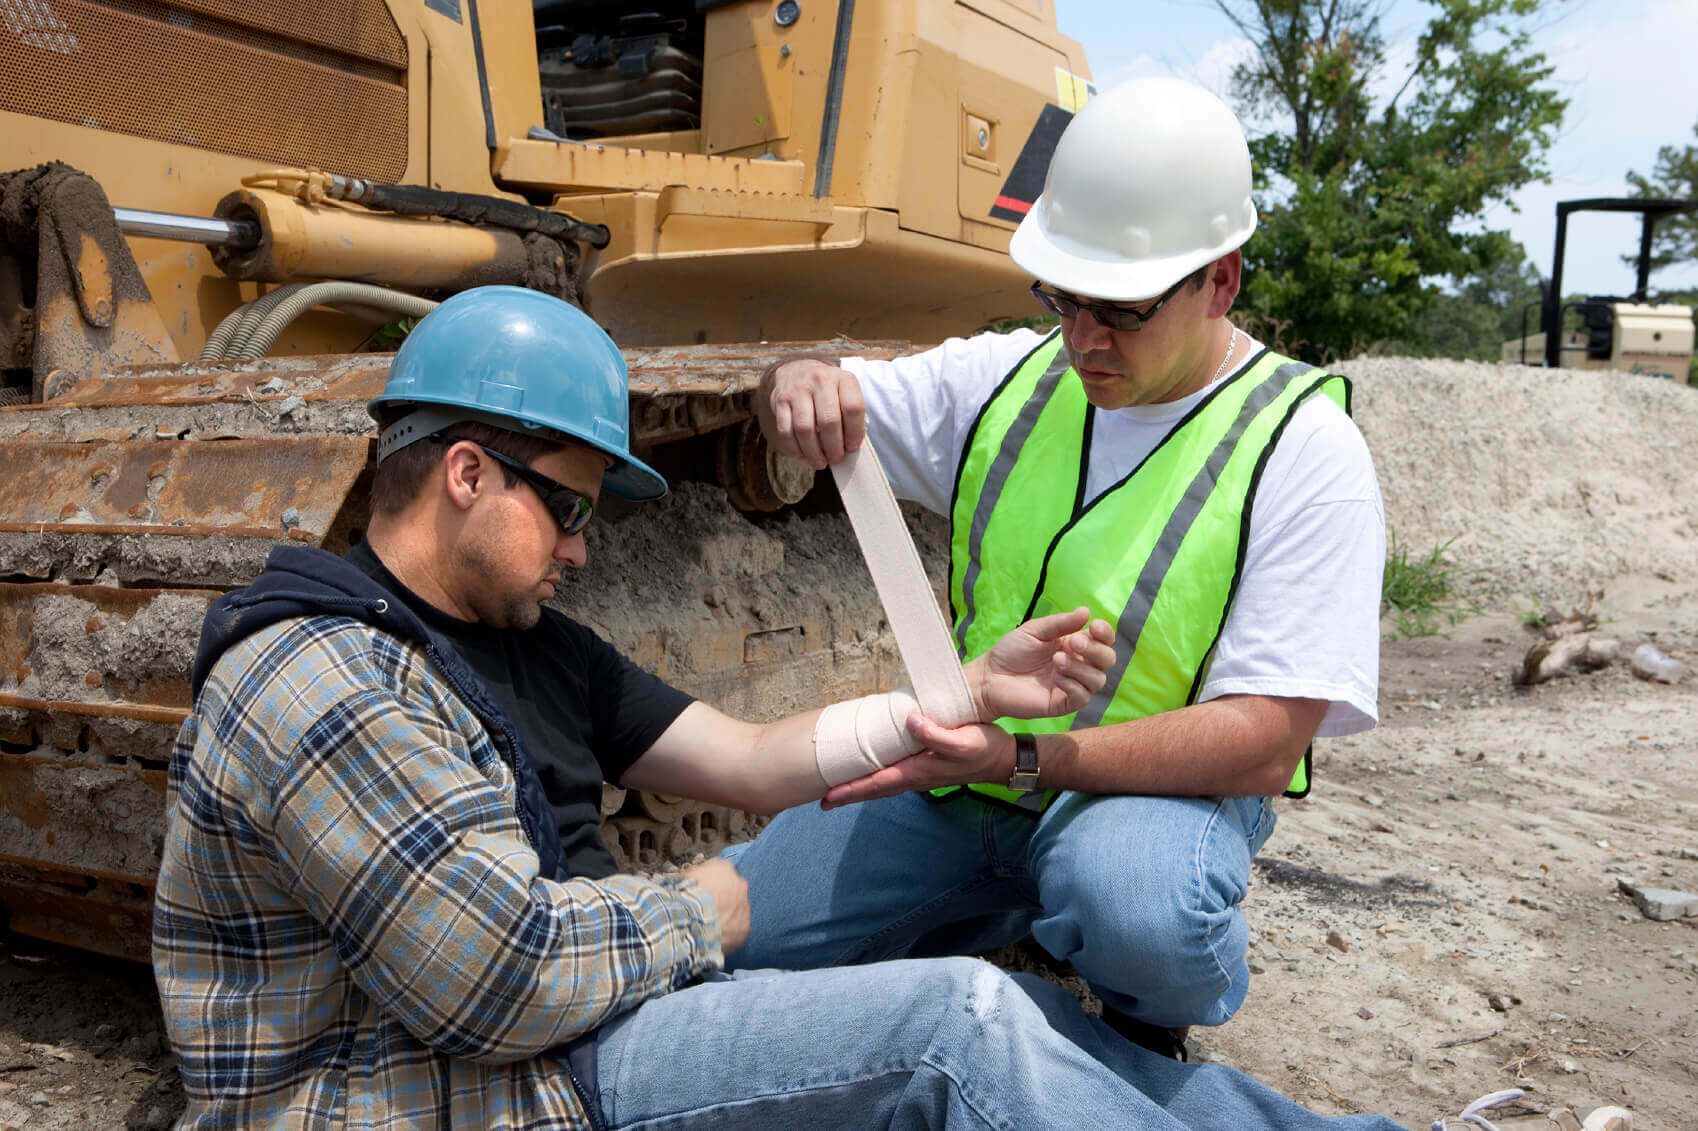 construction foreman applying first aid to injured worker at a work site